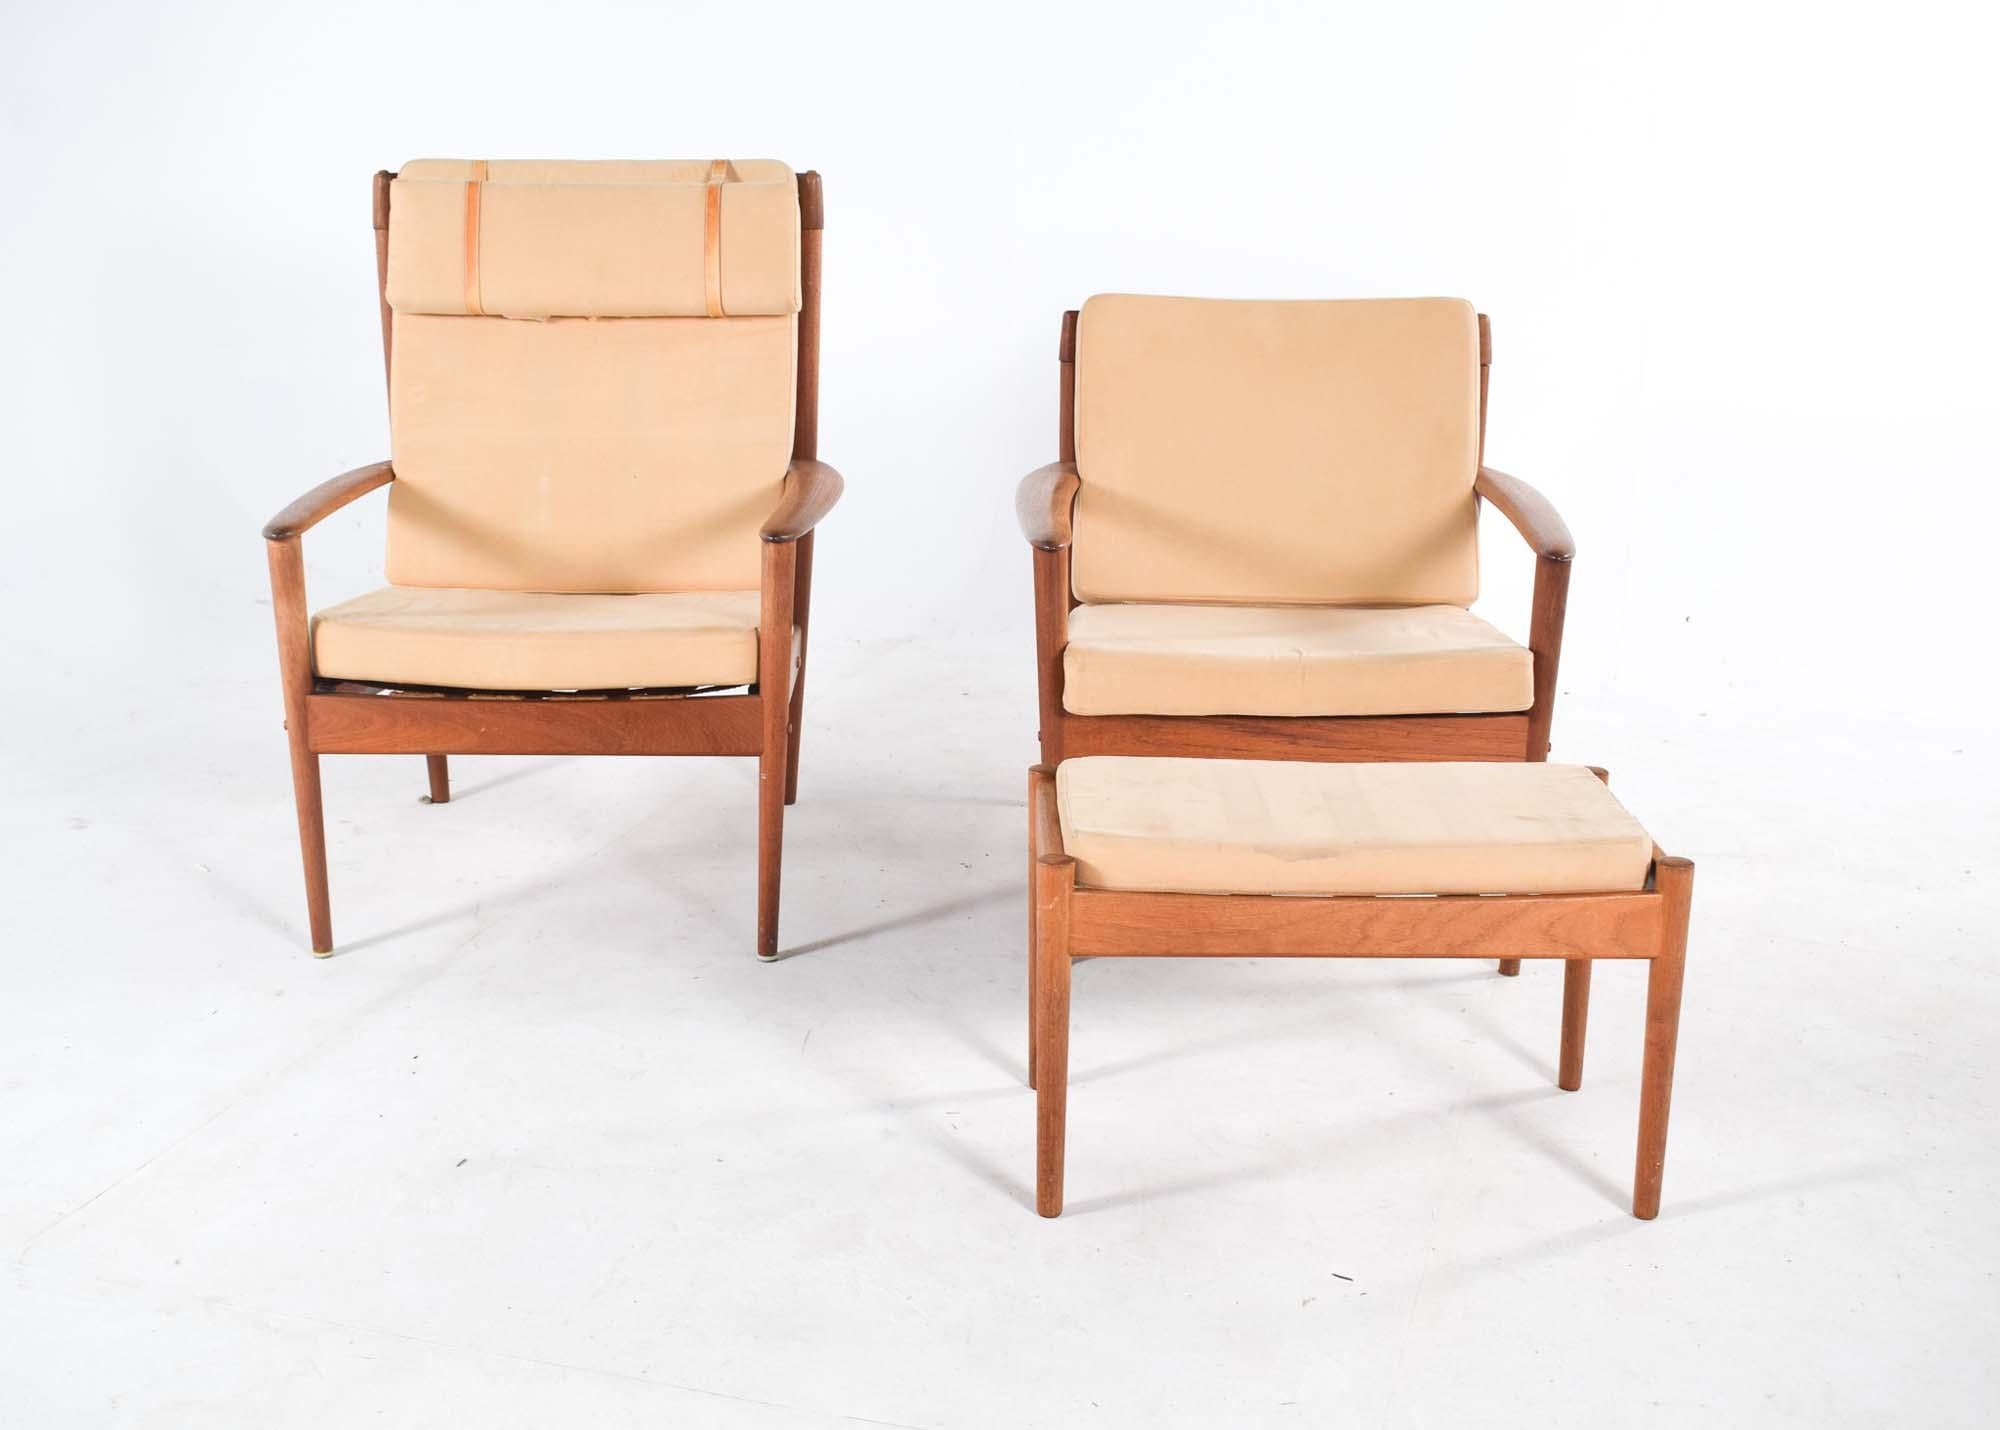 Mid-Century Modern Pair of Teak Armchairs by Grete Jalk by Poul Jeppesen in 1956 For Sale